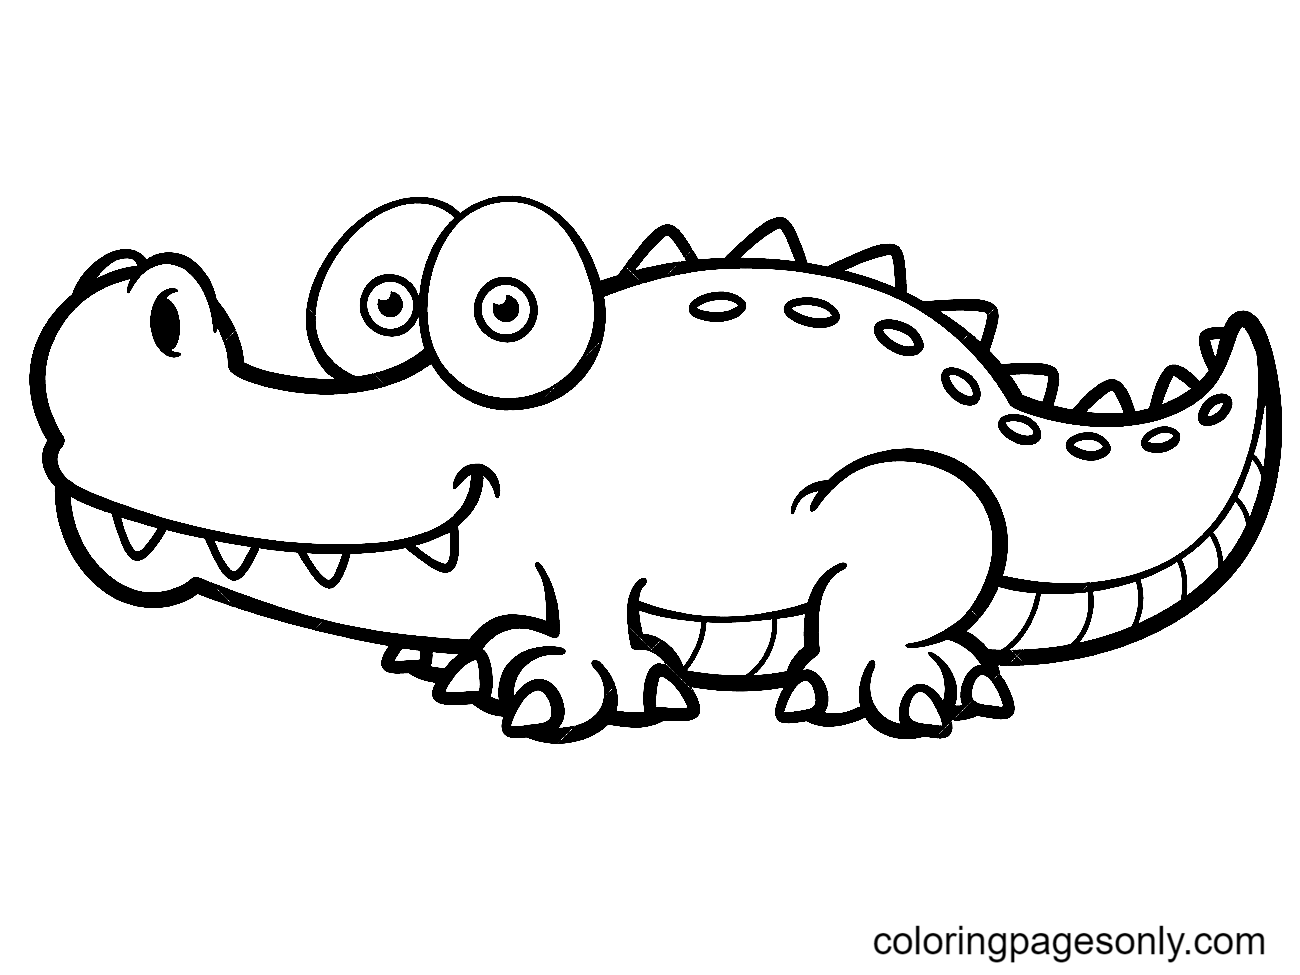 Lovely Alligator Coloring Page